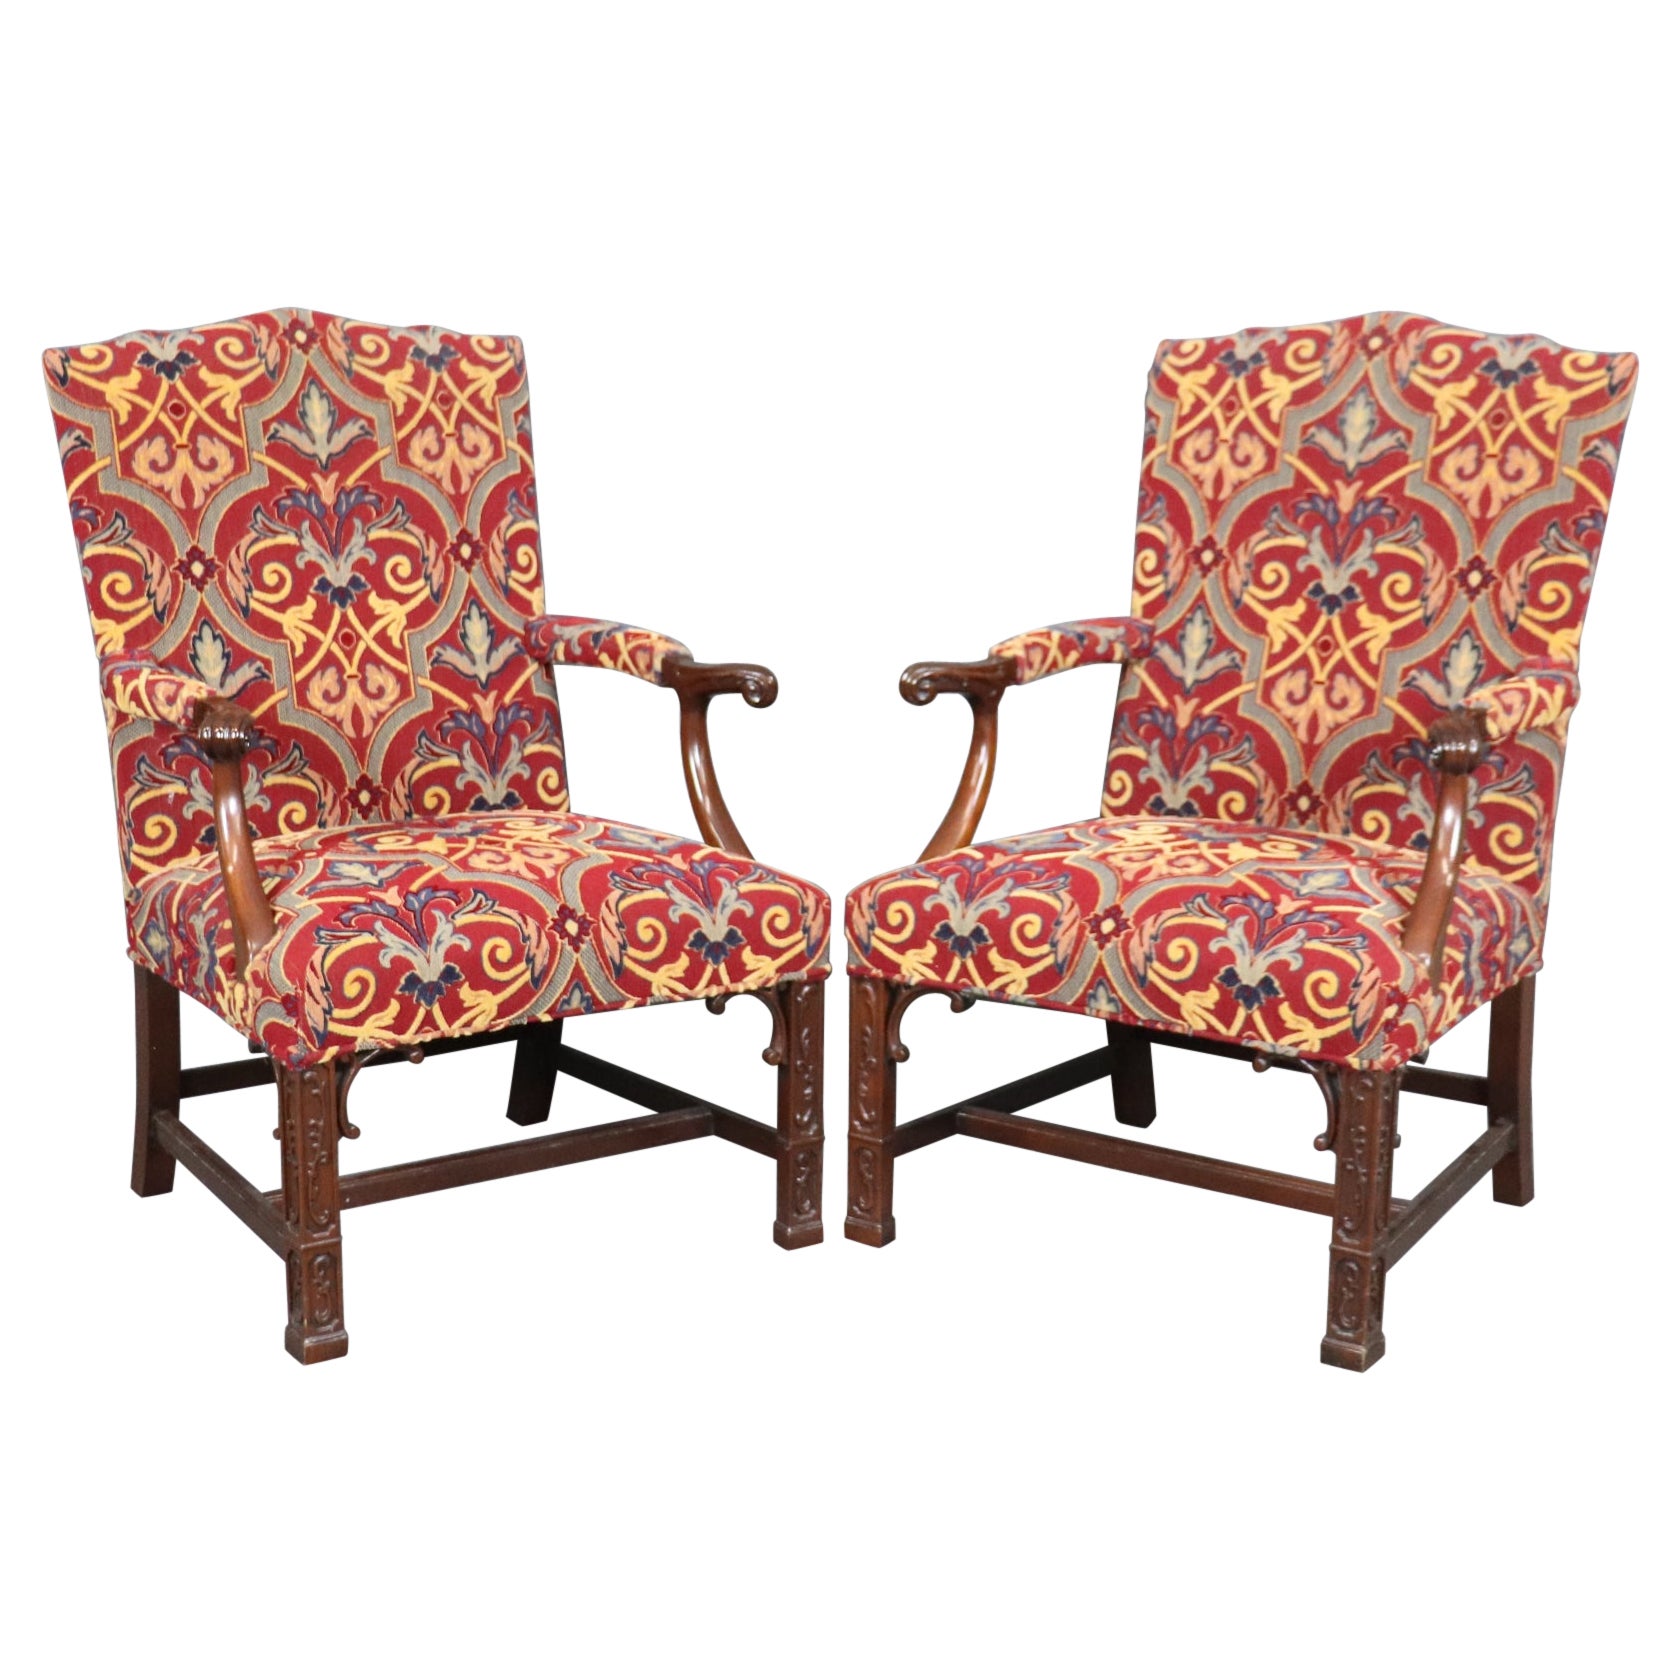 Pair of Solid Mahogany Blind Fretwork Chinese Chippendale Armchairs By Southwood For Sale